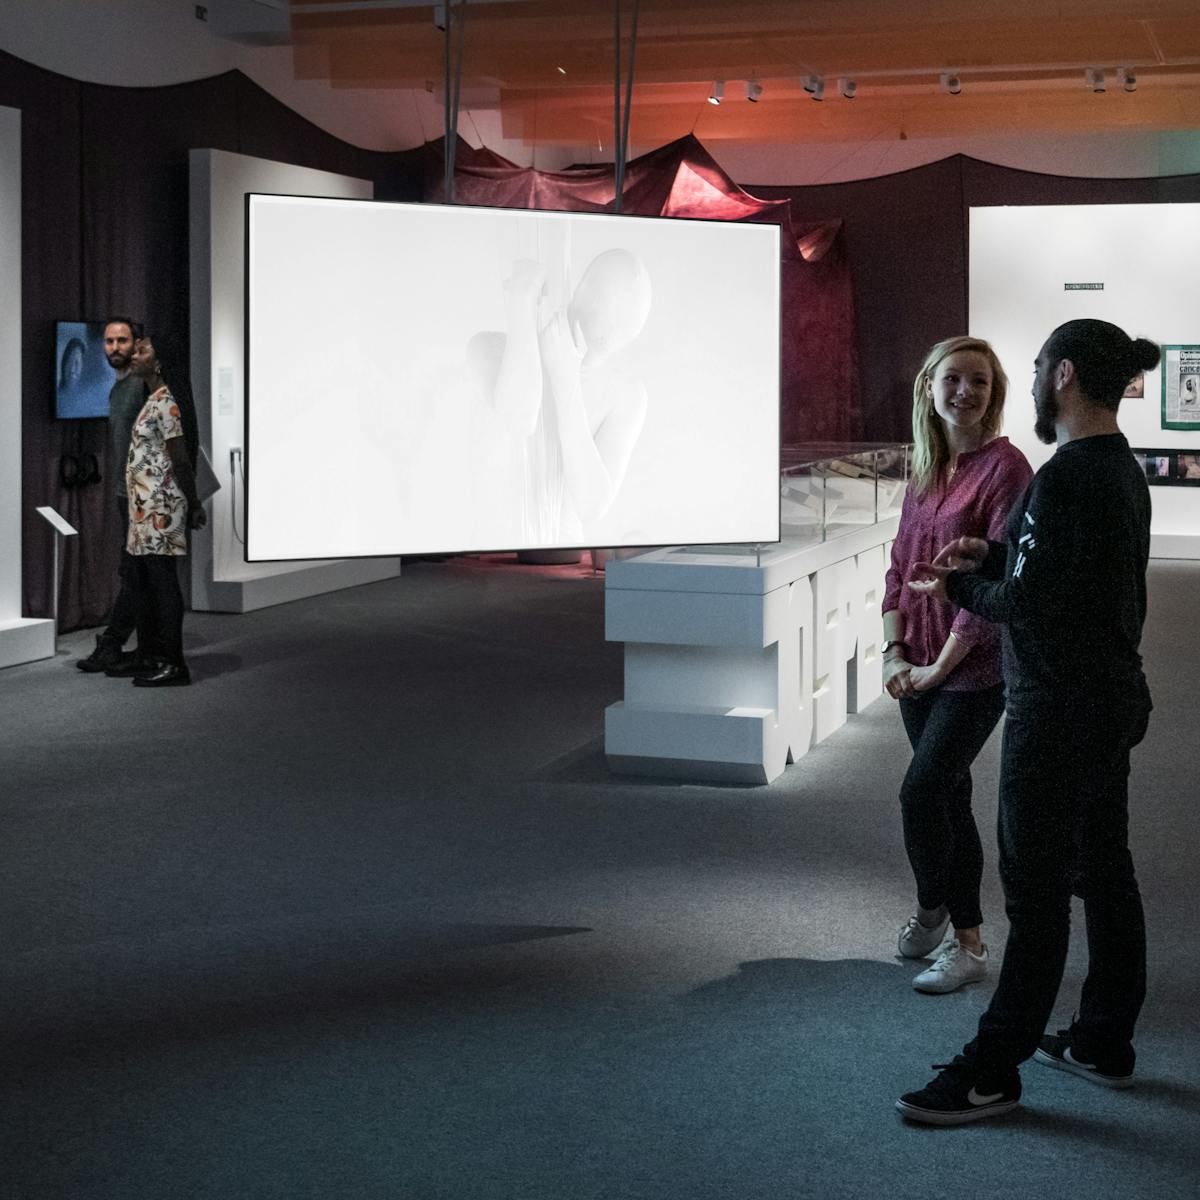 Photograph of the Misbehaving Bodies exhibition at Wellcome Collection, showing a wide view of the space. in the foreground a young man and woman discuss a video piece projected onto a large screen. In the background an other young man and woman look at the artworks that are displayed on the wall.